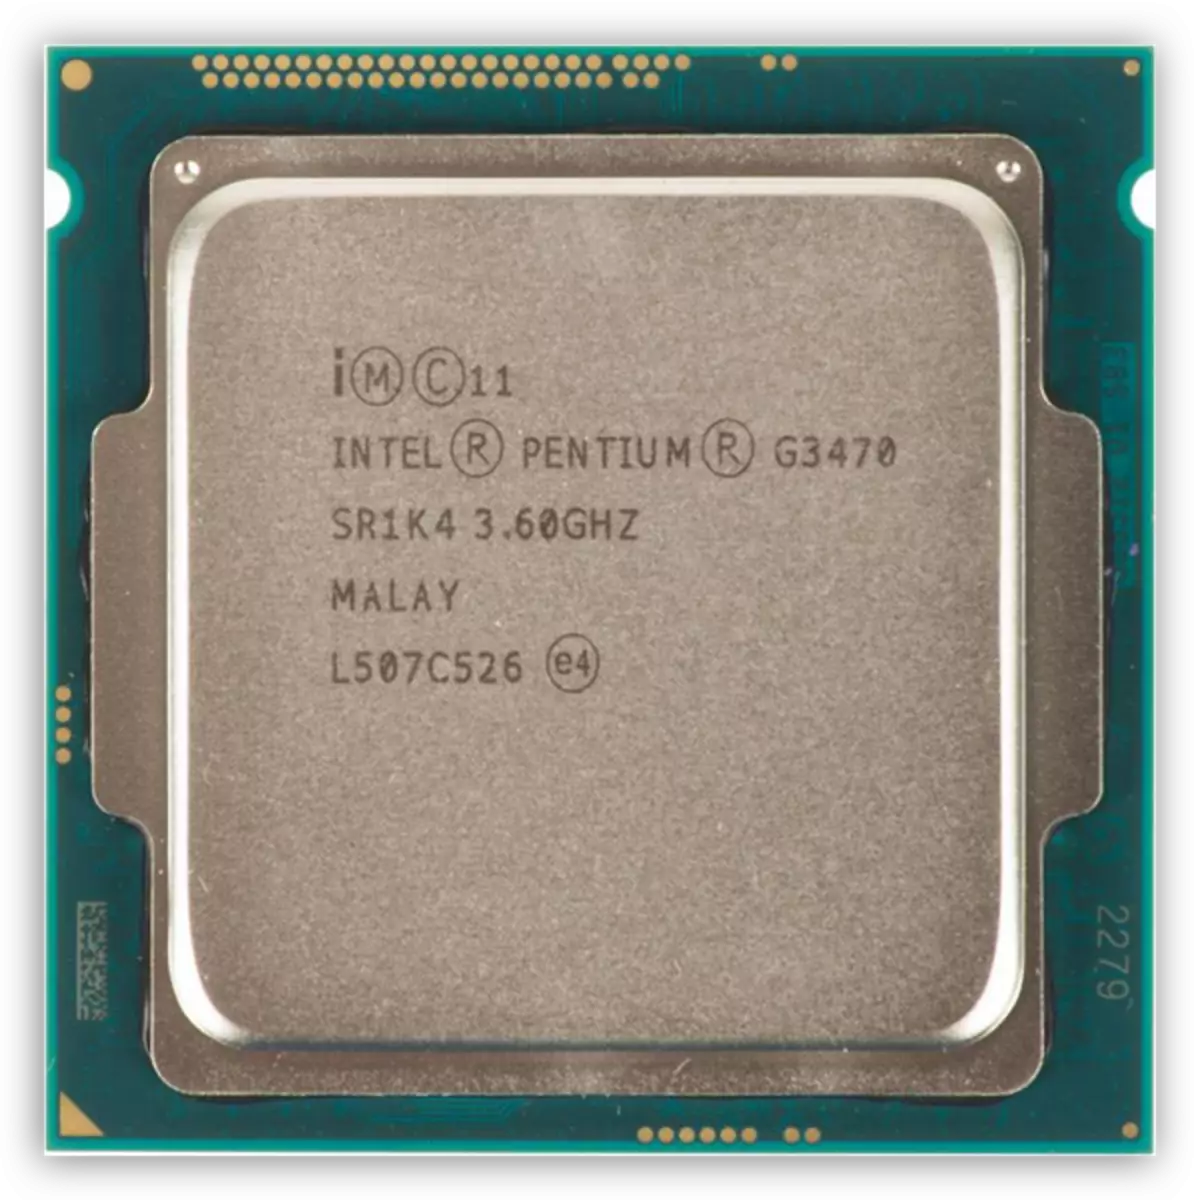 Pentium G3470 processor sa architecture ng Haswell.